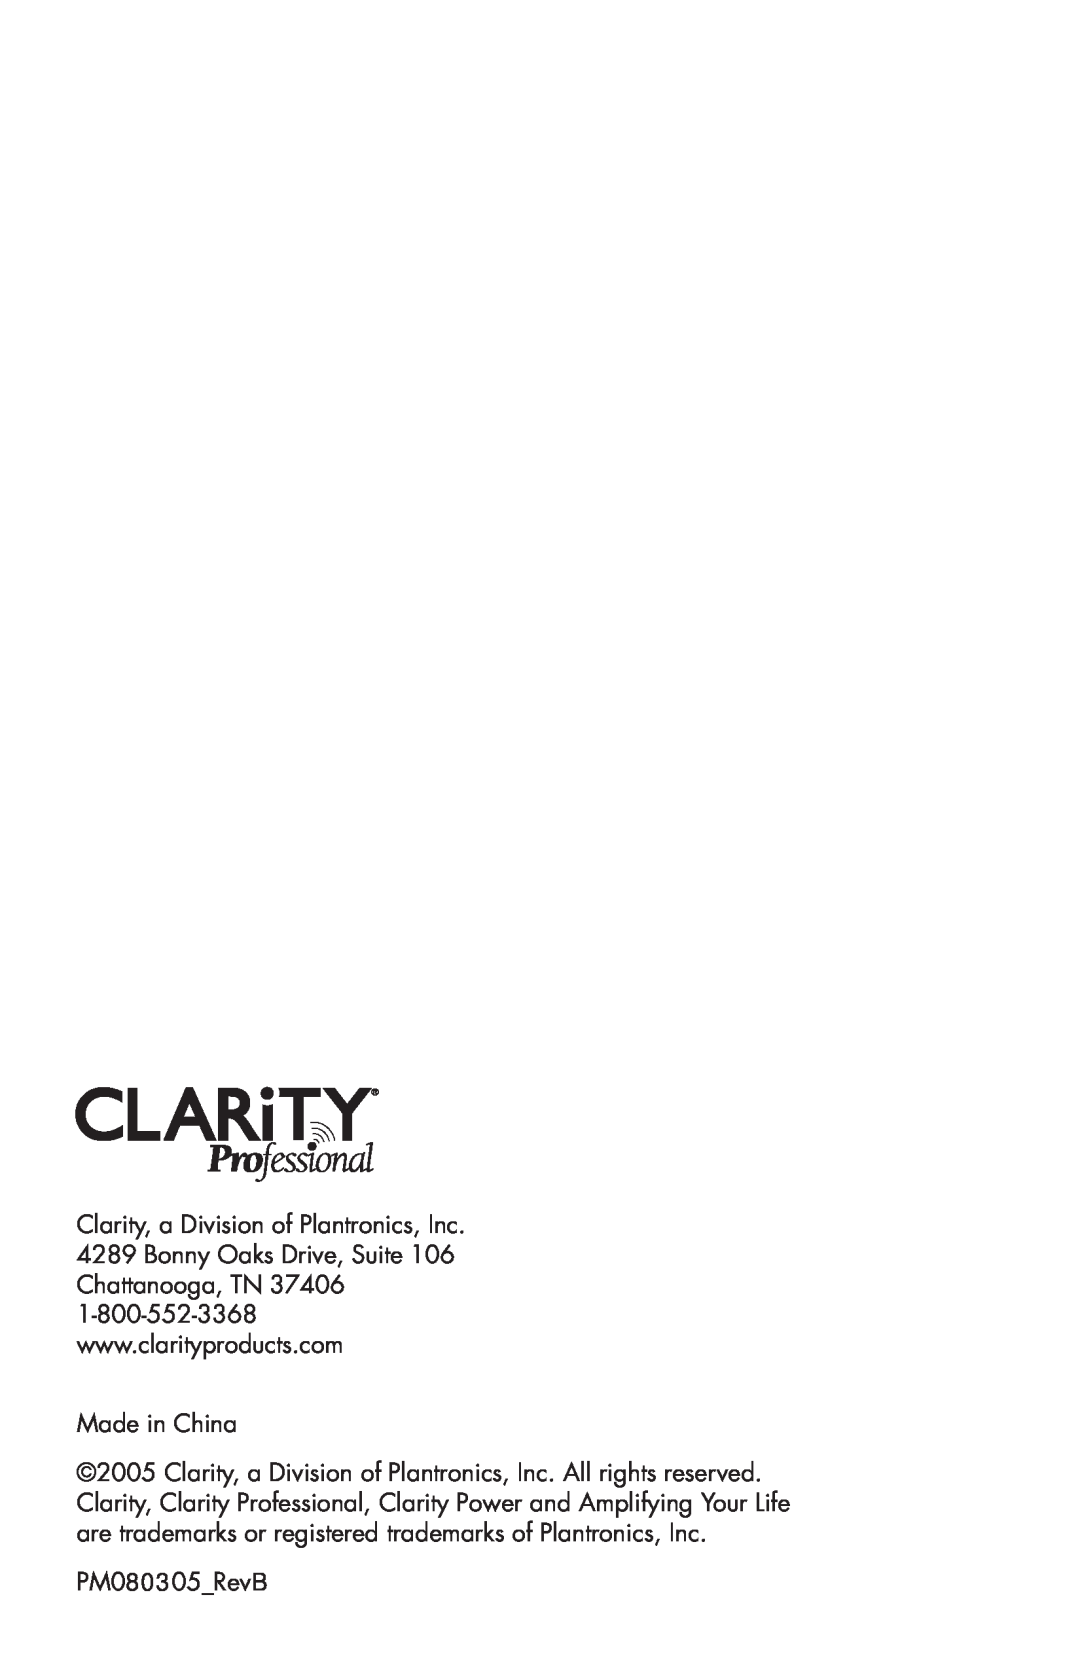 Clarity C4205 manual Made in China, PM080305RevB 